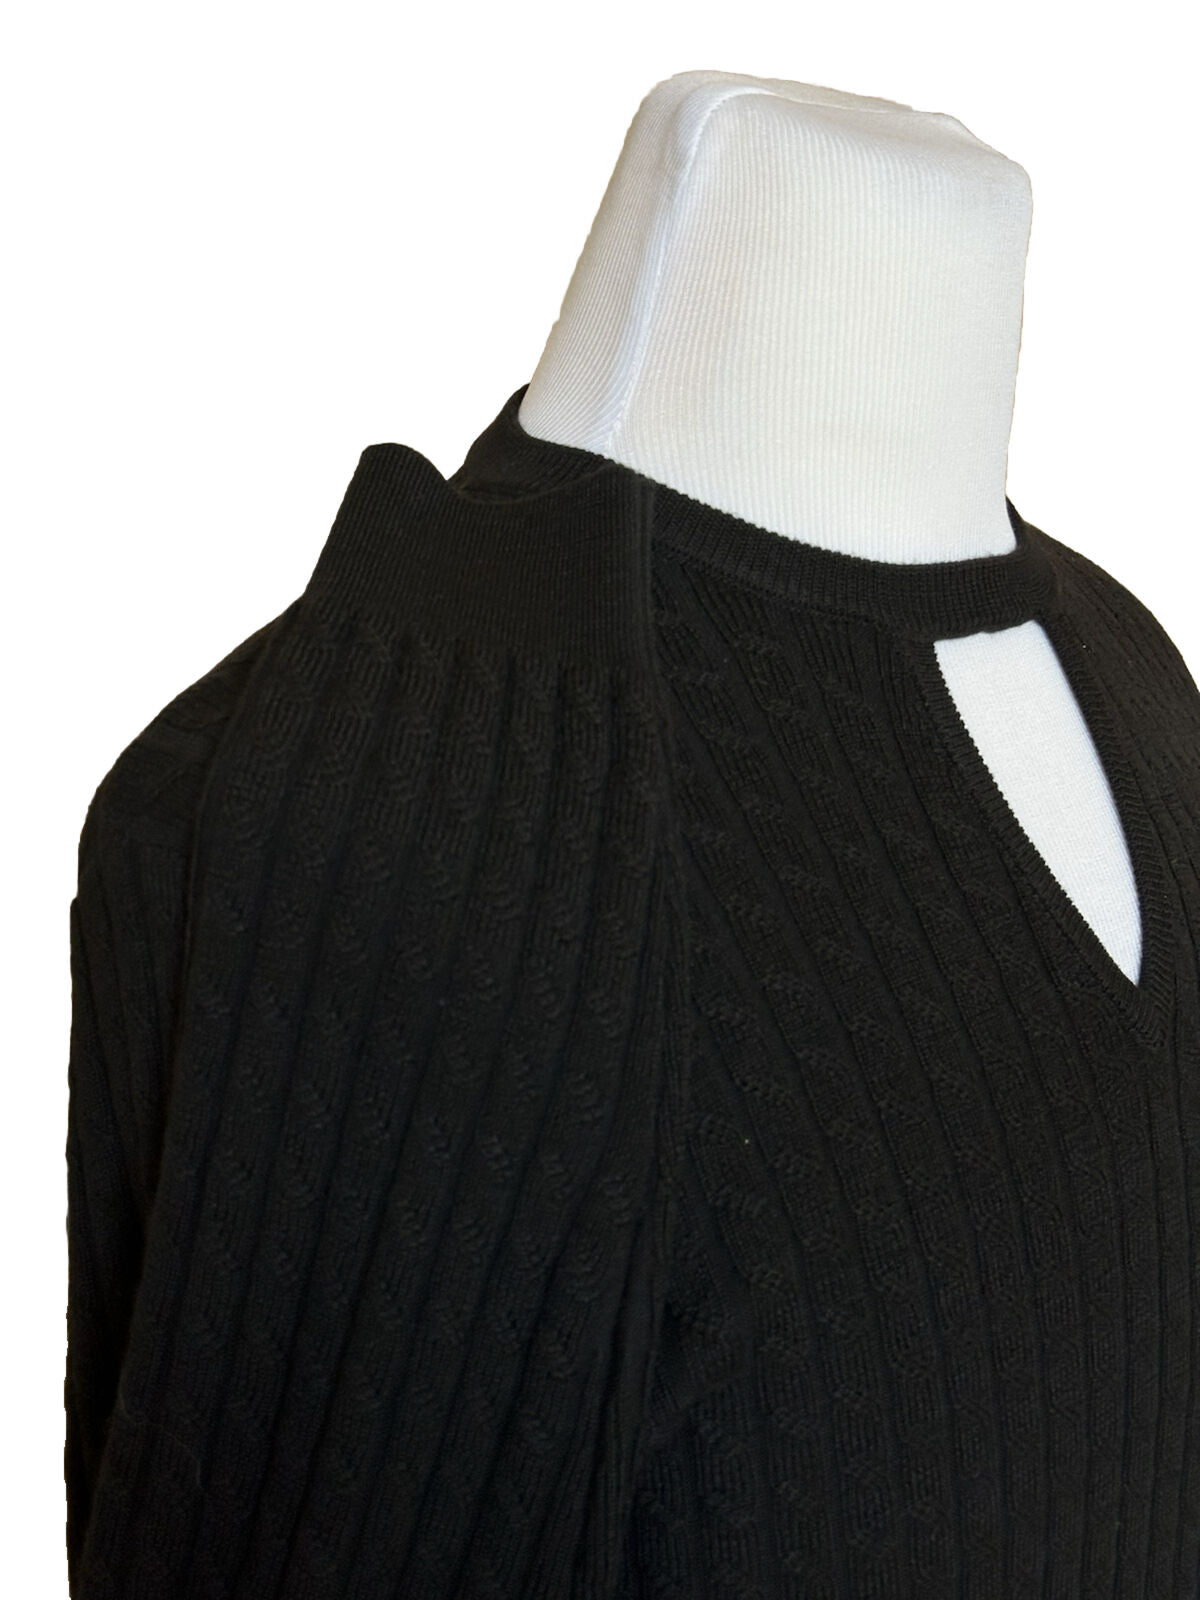 NWT $1250 Fendi Wool Knit Pullover Sweater Black 52 Euro FZX077 Made in Italy